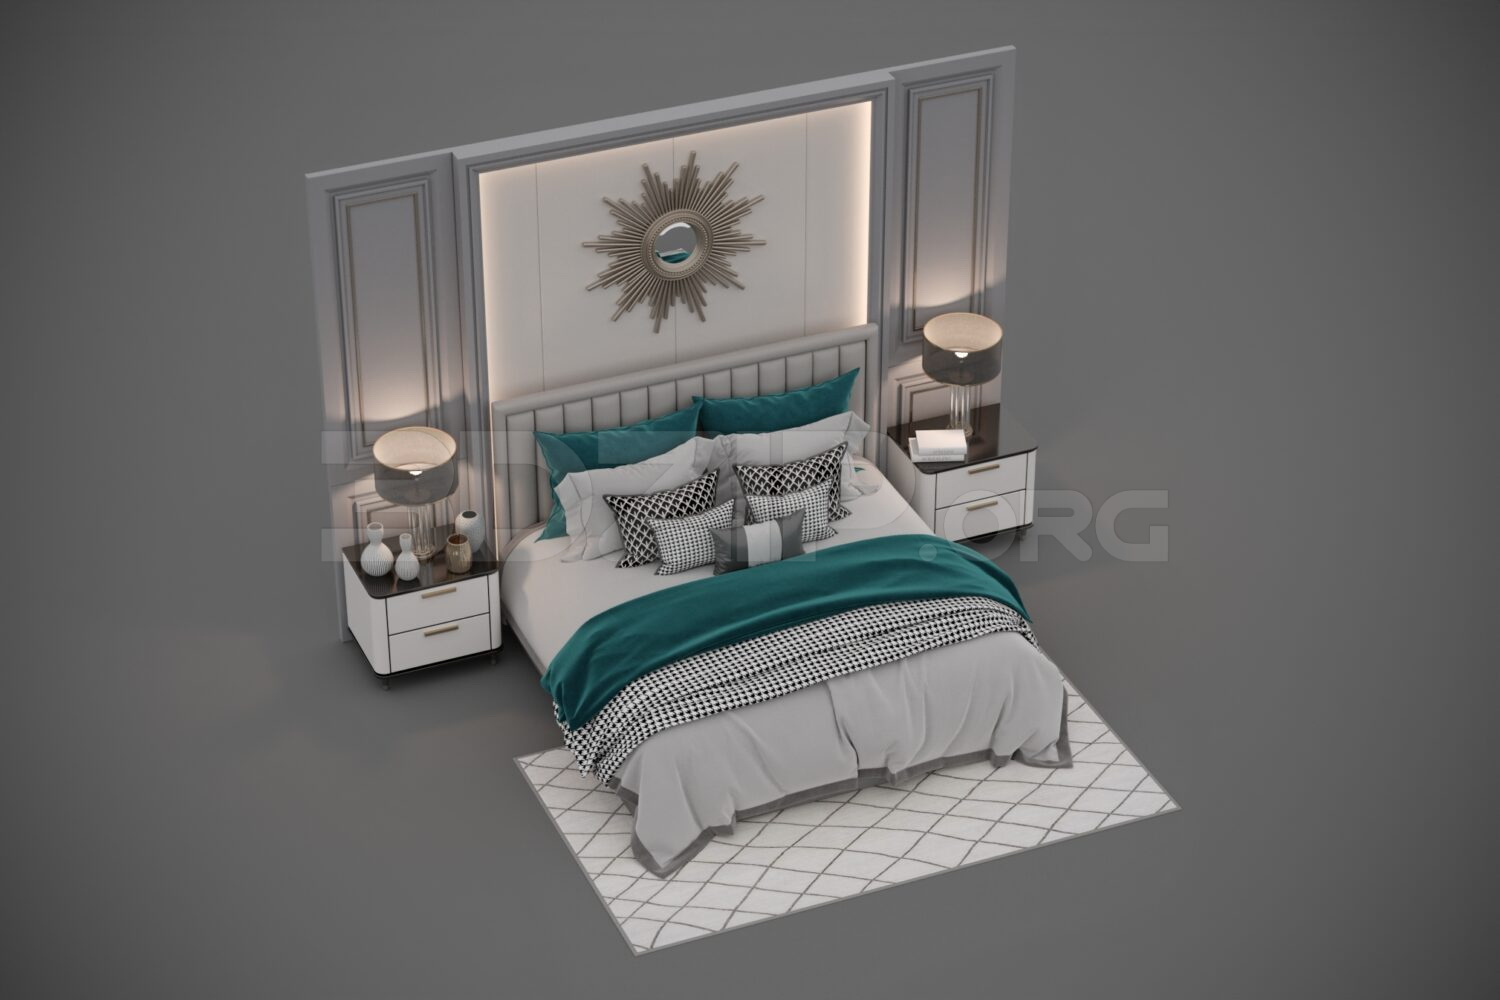 2209. Download Free Bed Model By Viet Long Lee